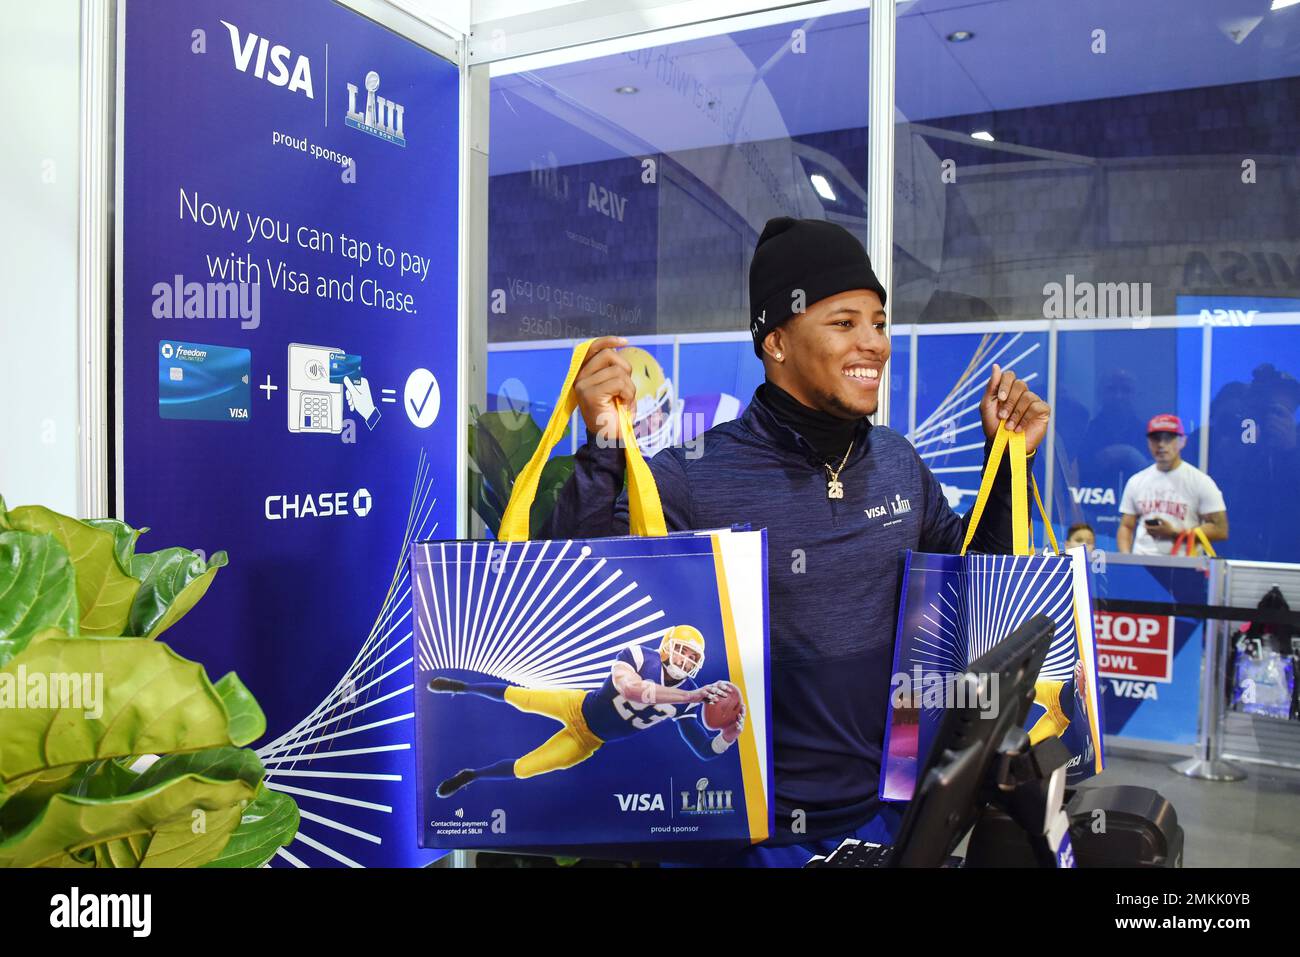 IMAGE DISTRIBUTED FOR VISA - Running back Saquon Barkley takes over cash  register duties with Visa at the NFL shop, and helped fans tap to pay with  their contactless cards in the